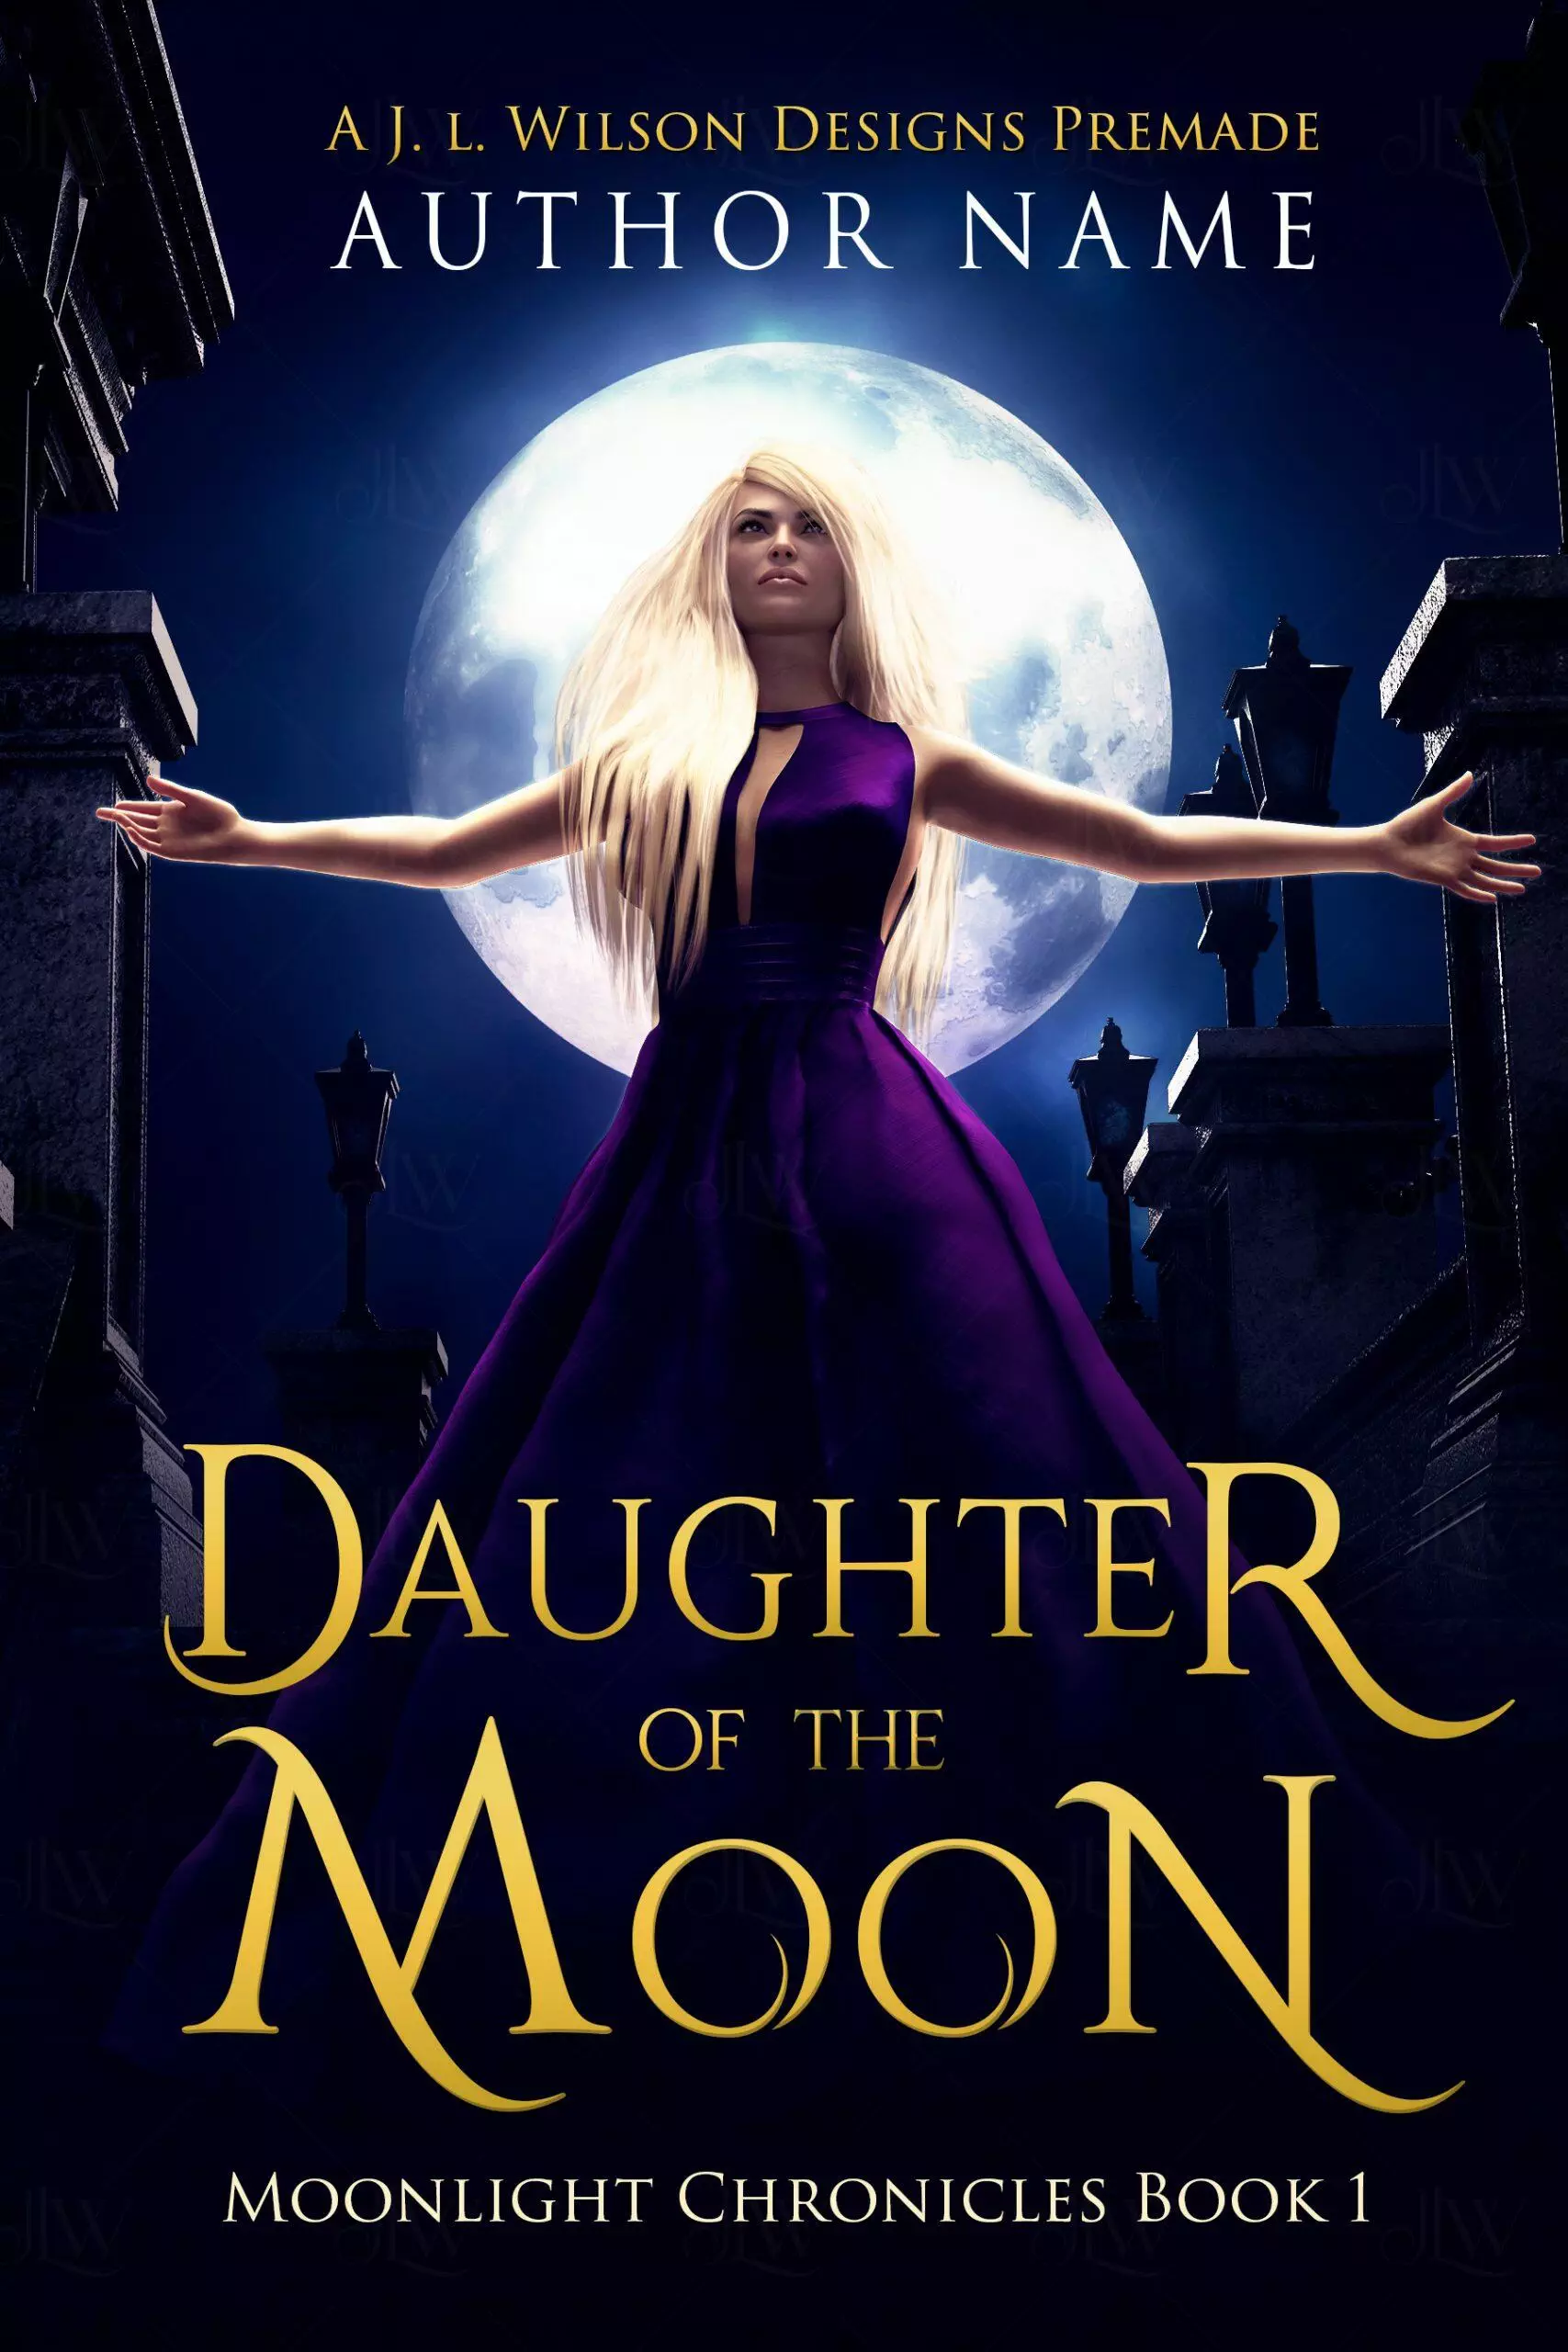 A paranormal fantasy romance book cover with a beautiful blond woman in front of a mausoleum